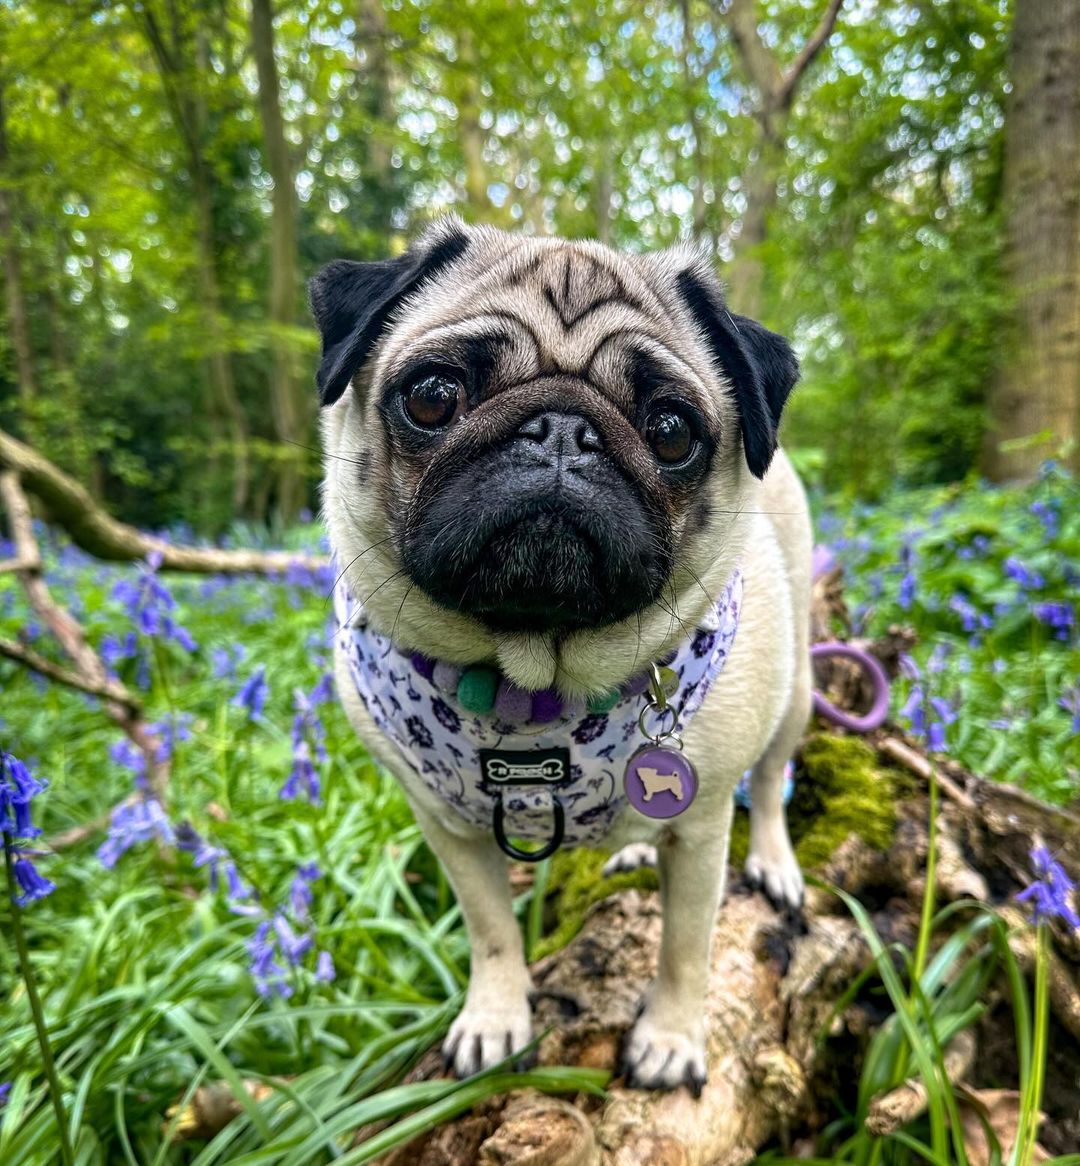 May your days be filled with sunshine, smiles, and sweet moments 💜💜💜 Happy new month 💜💜 Make a wish harness -  - TEAMBH Ad/brandrep #cookiethepug  #puglove #may #newmonth #mayflowers #bluebells #puglove #cutepug #loveher #fawnpug